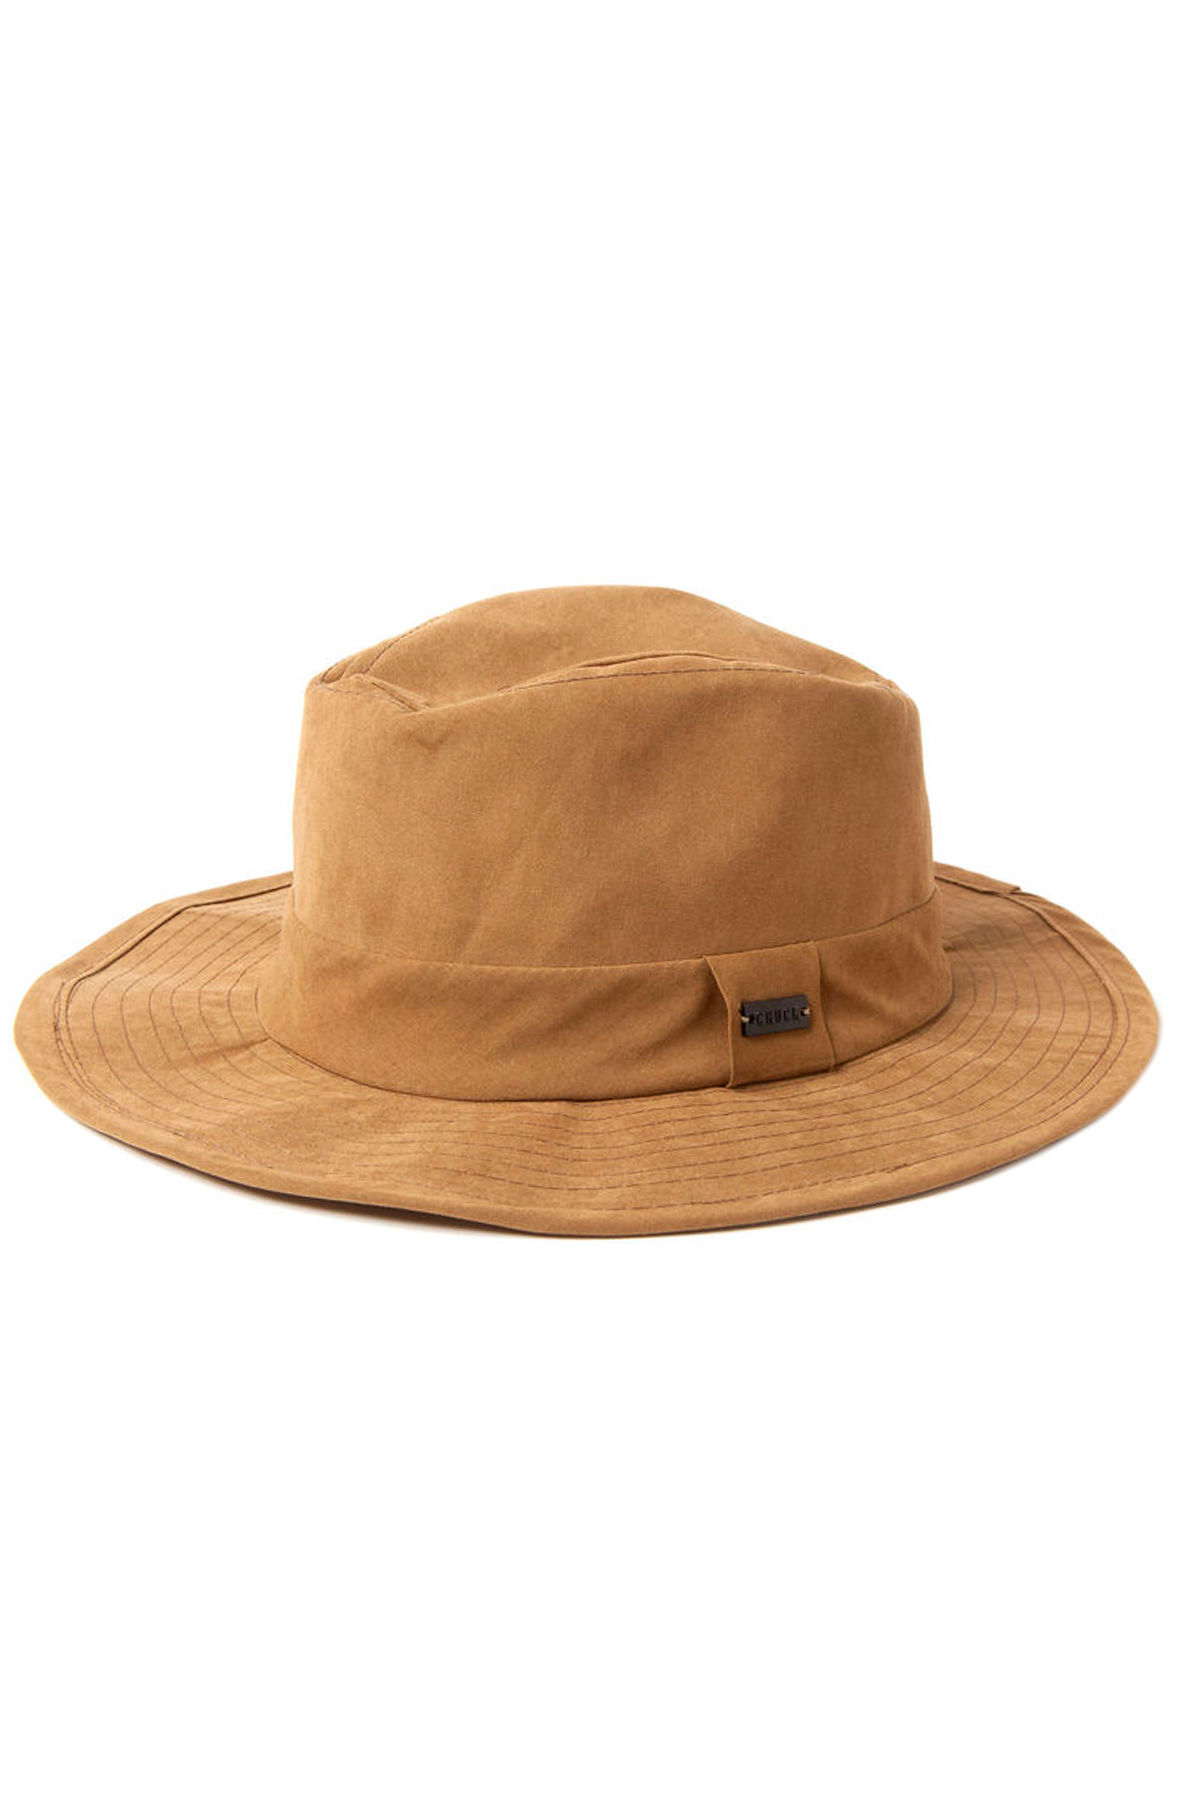 the malcolm hat in sand